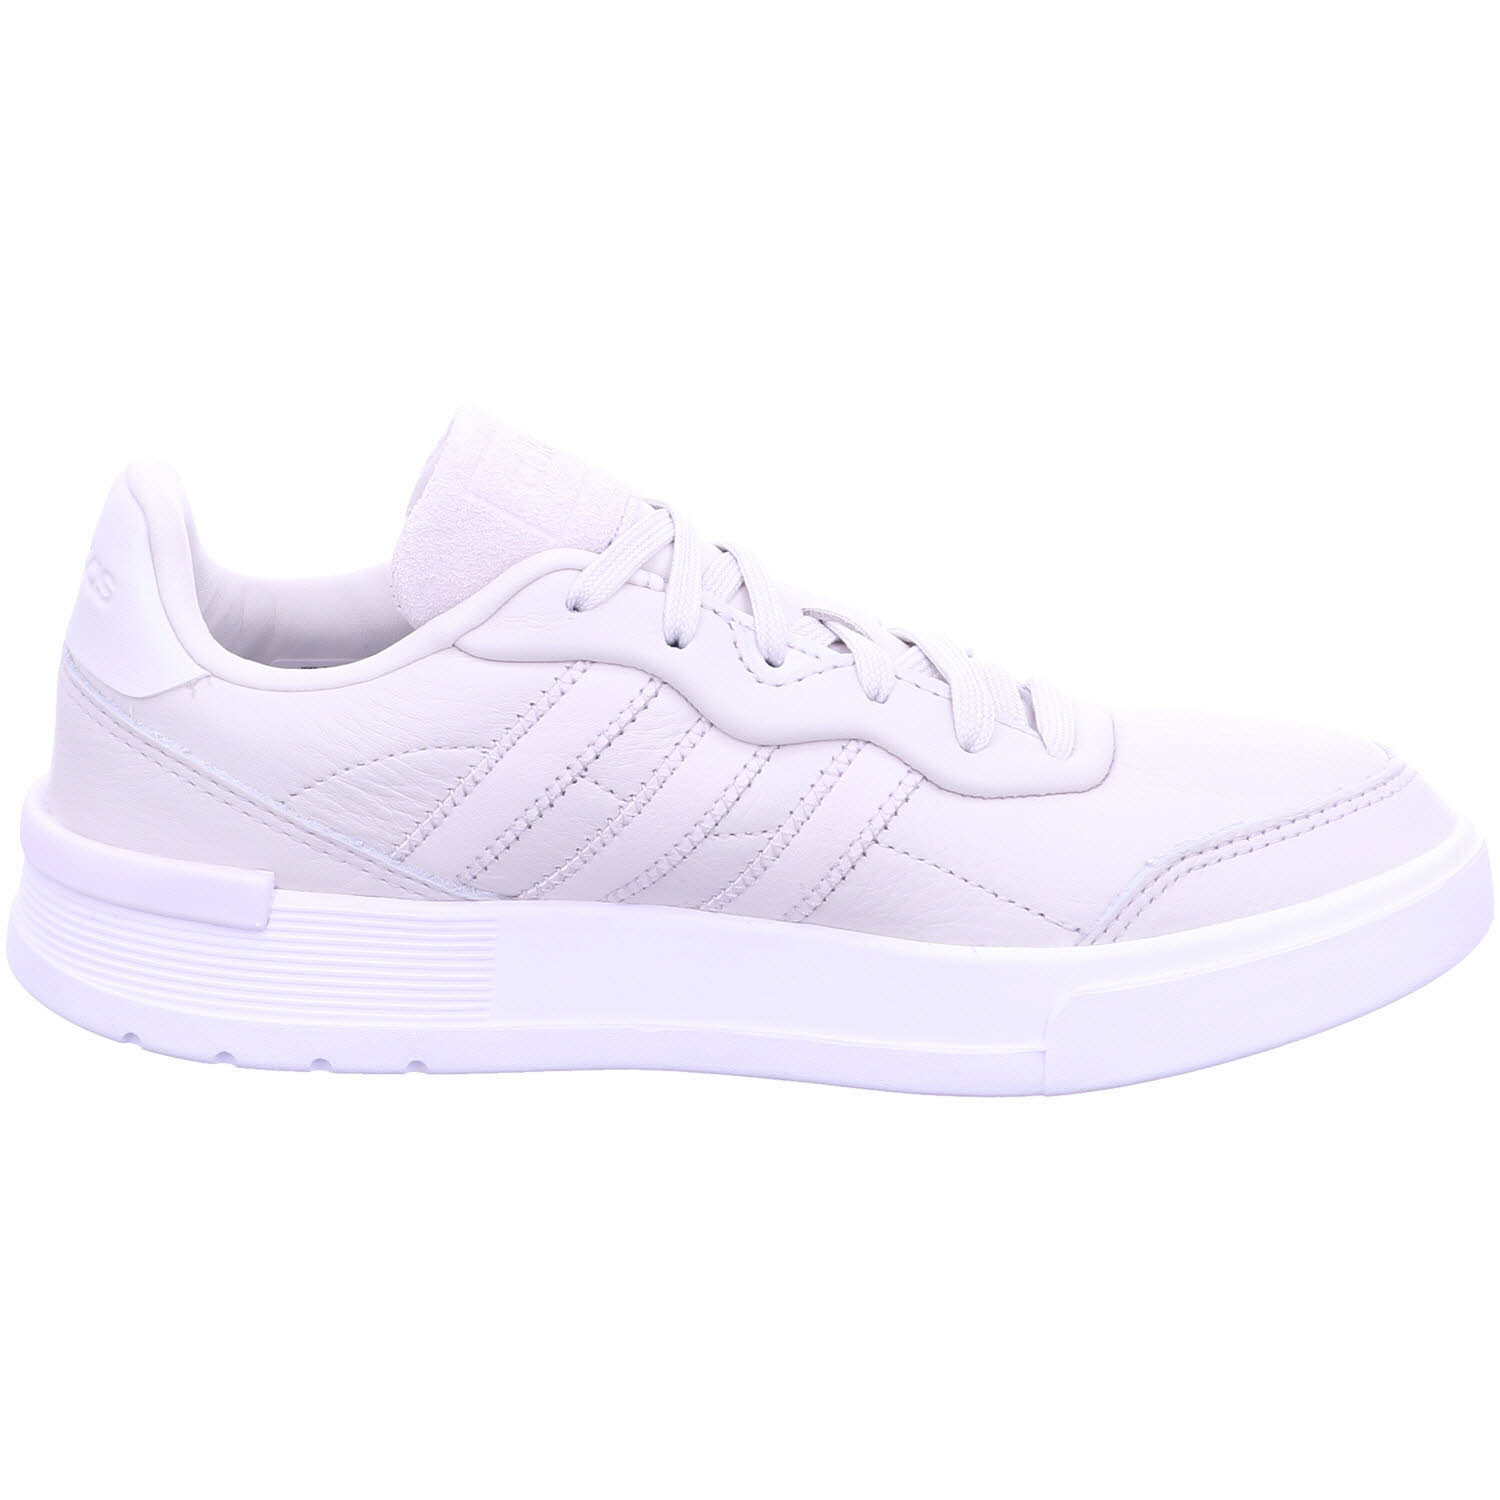 Adidas Sneaker CLUBCOURT,GREONE/GREONE/DSHGRY